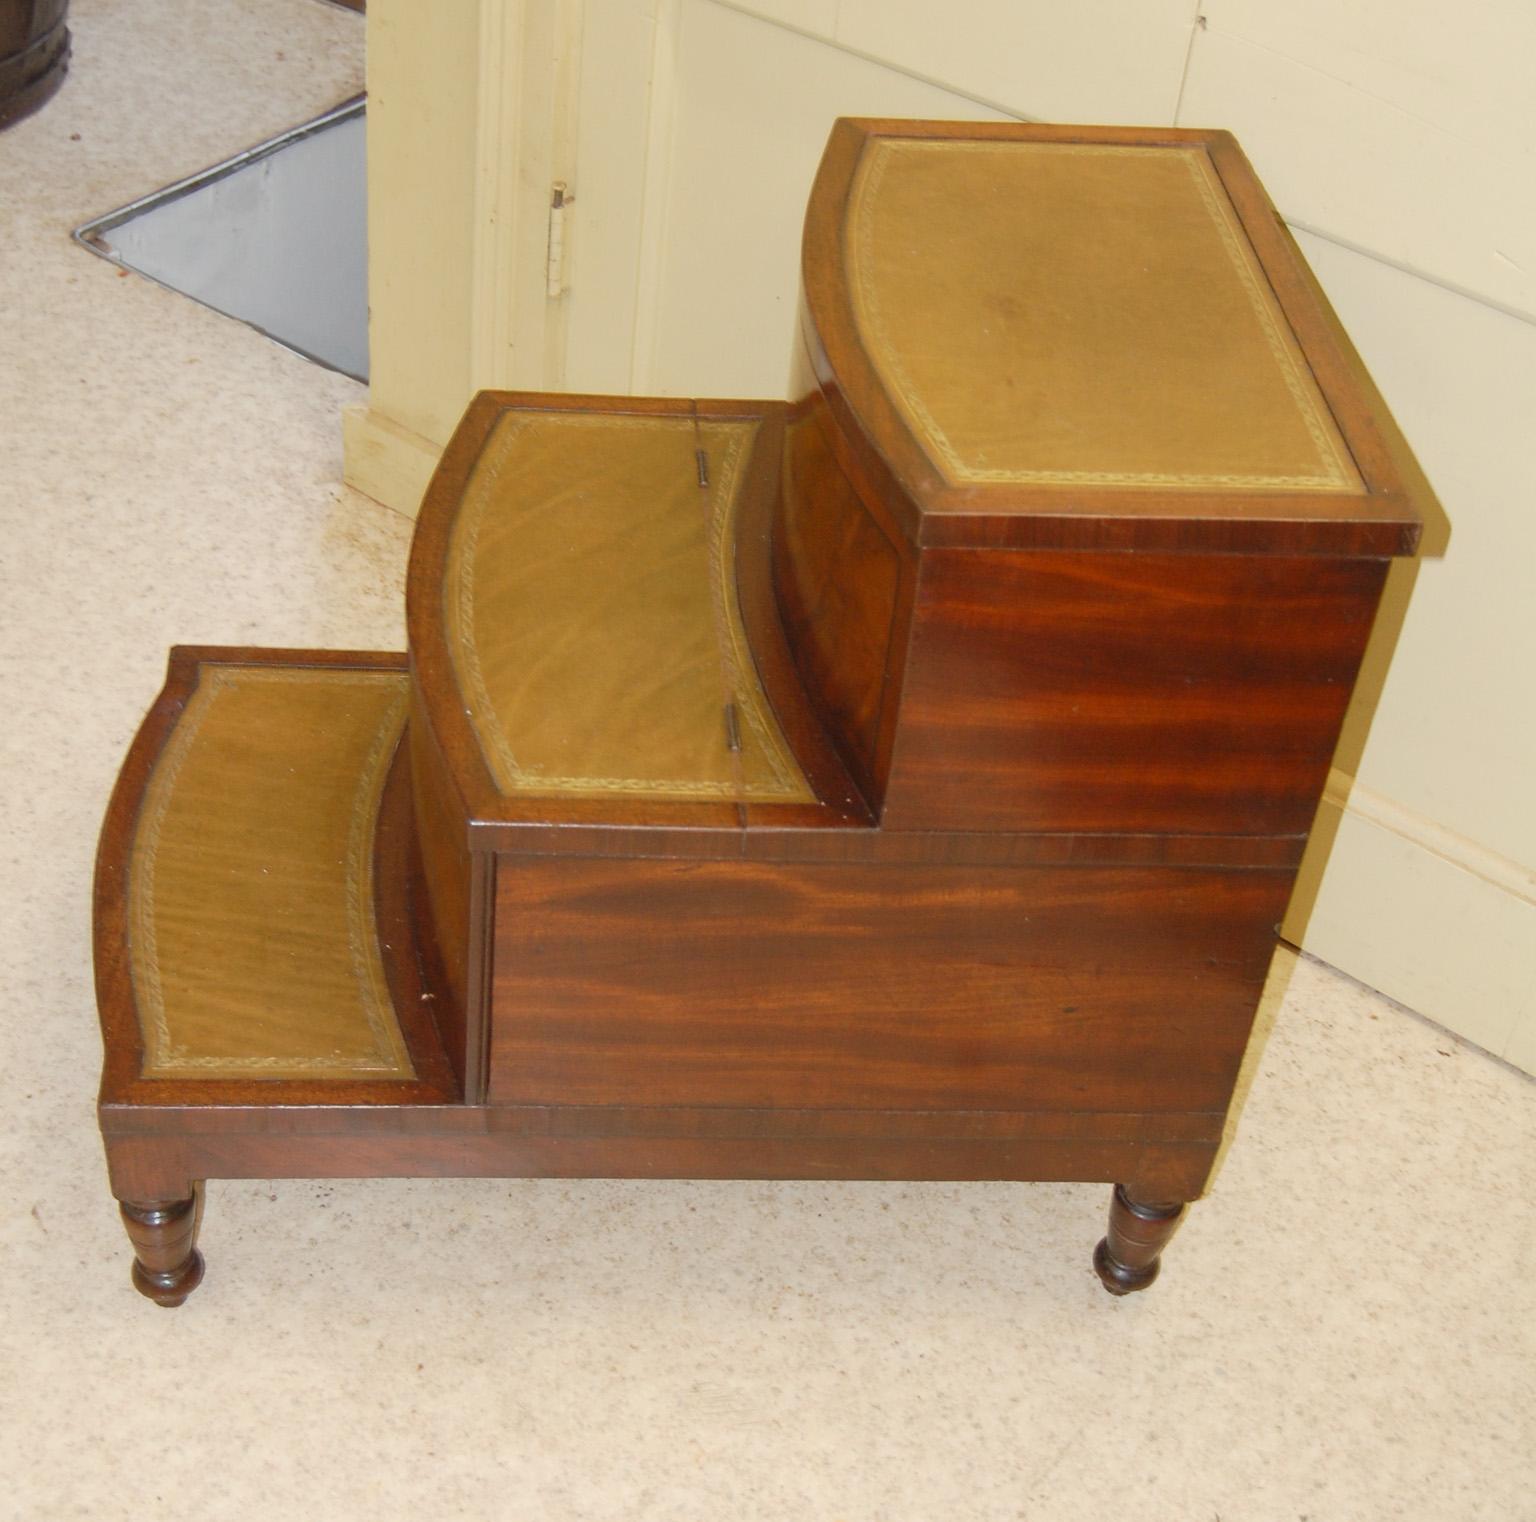 

 English Regency  bowfront mahogany converted bedstep commode.  The central pullout has been converted to a drawer which slides in and out, the tread also hinges up for easy access.  The top step is also hinged, revealing another storage space. 